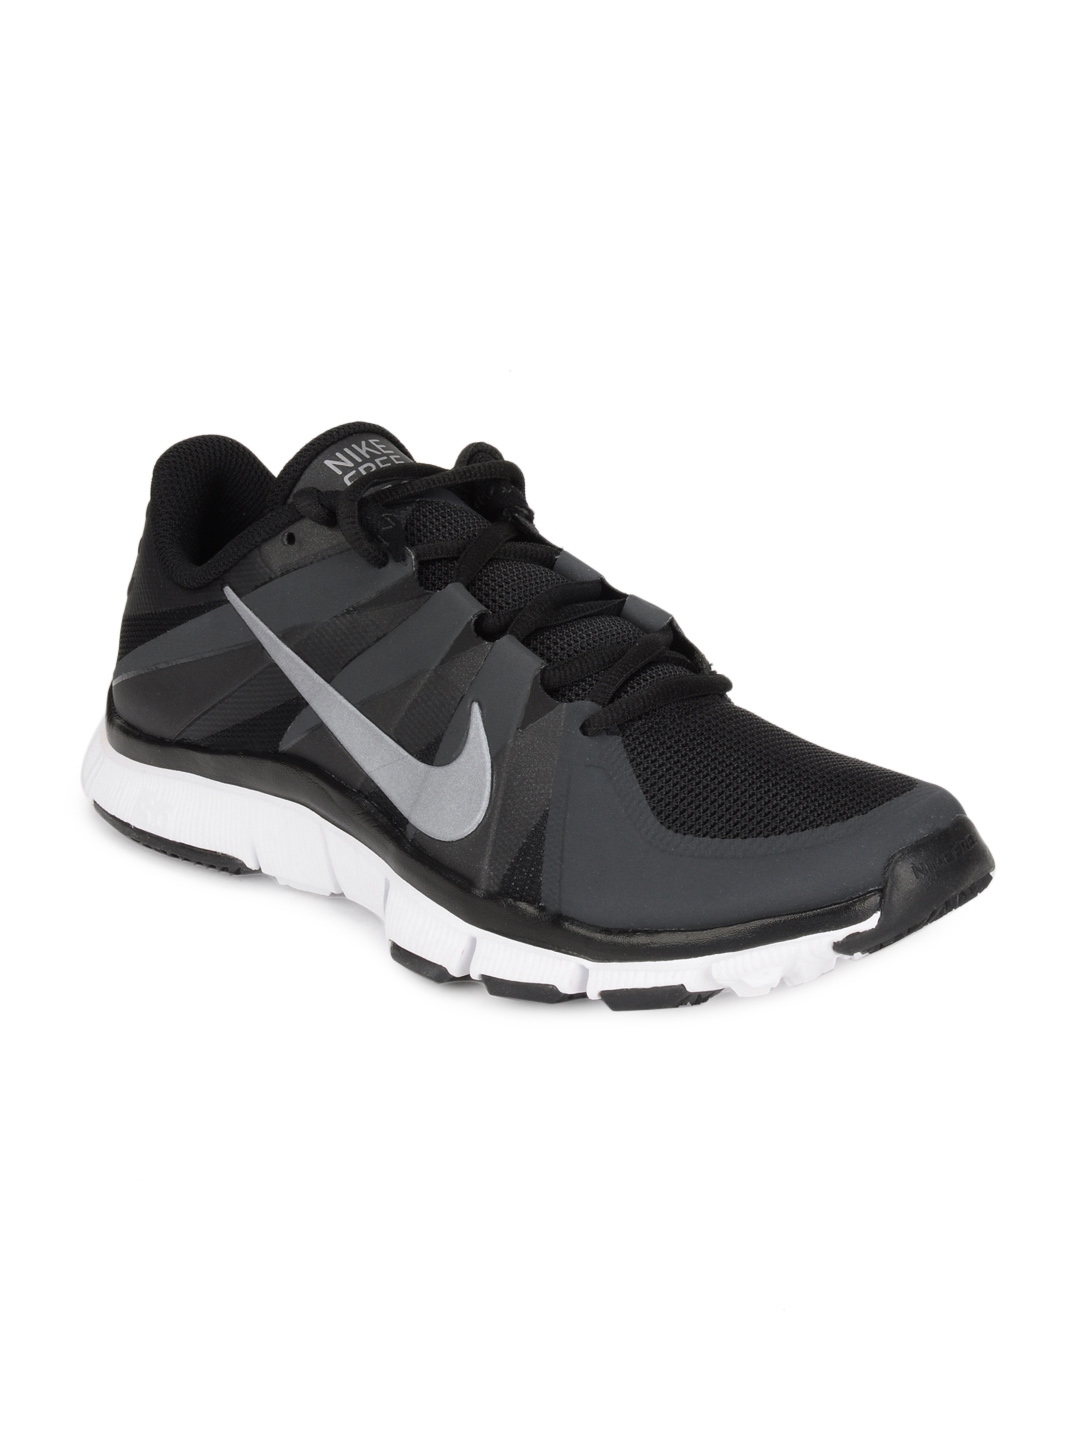 Buy Nike Men Free Trainer 5 0 Black Sports Shoes Sports Shoes For Men Myntra